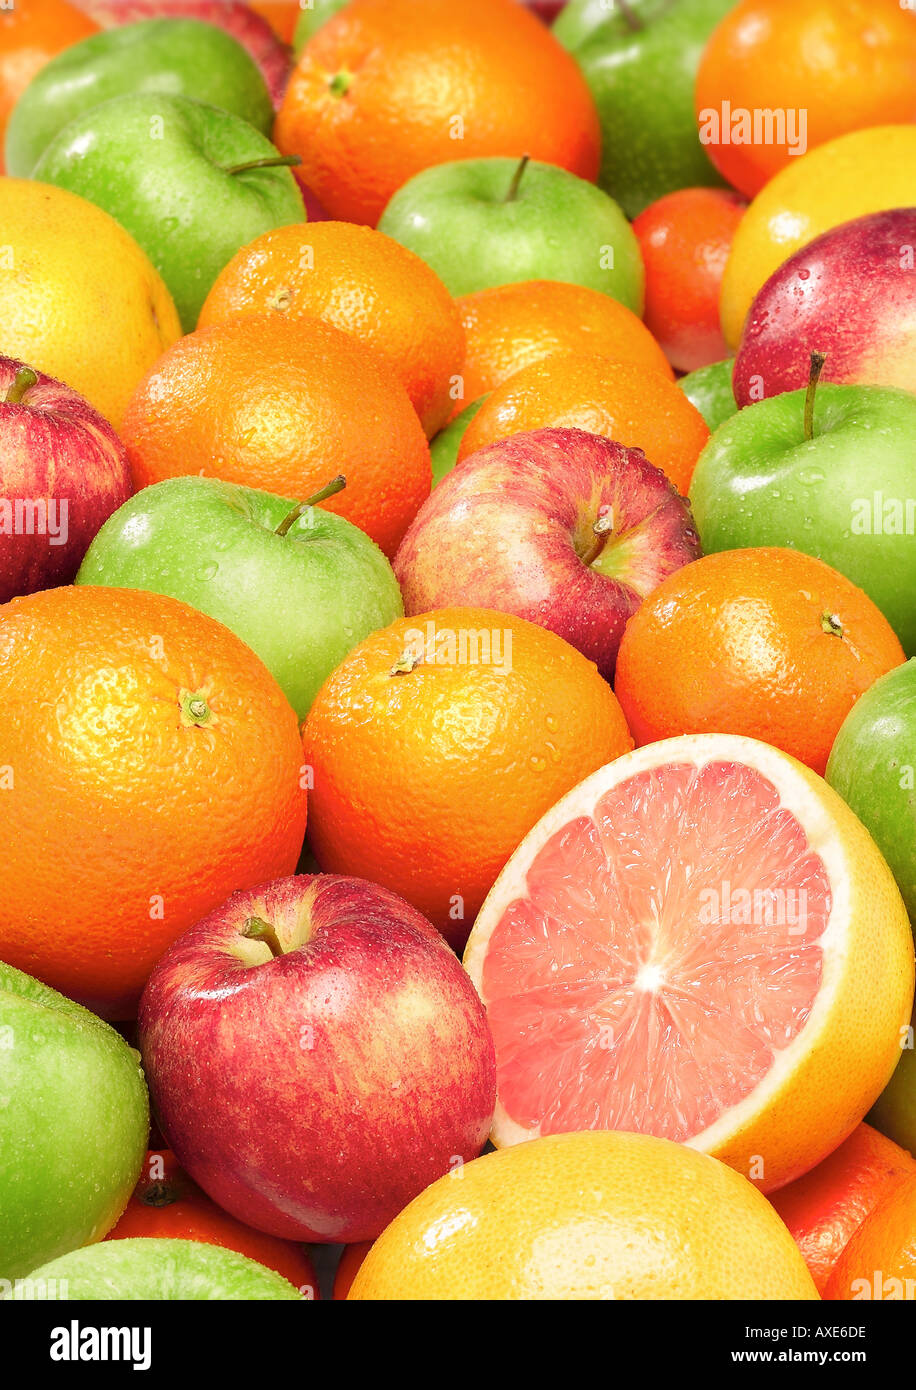 apples and citrus fruits Stock Photo